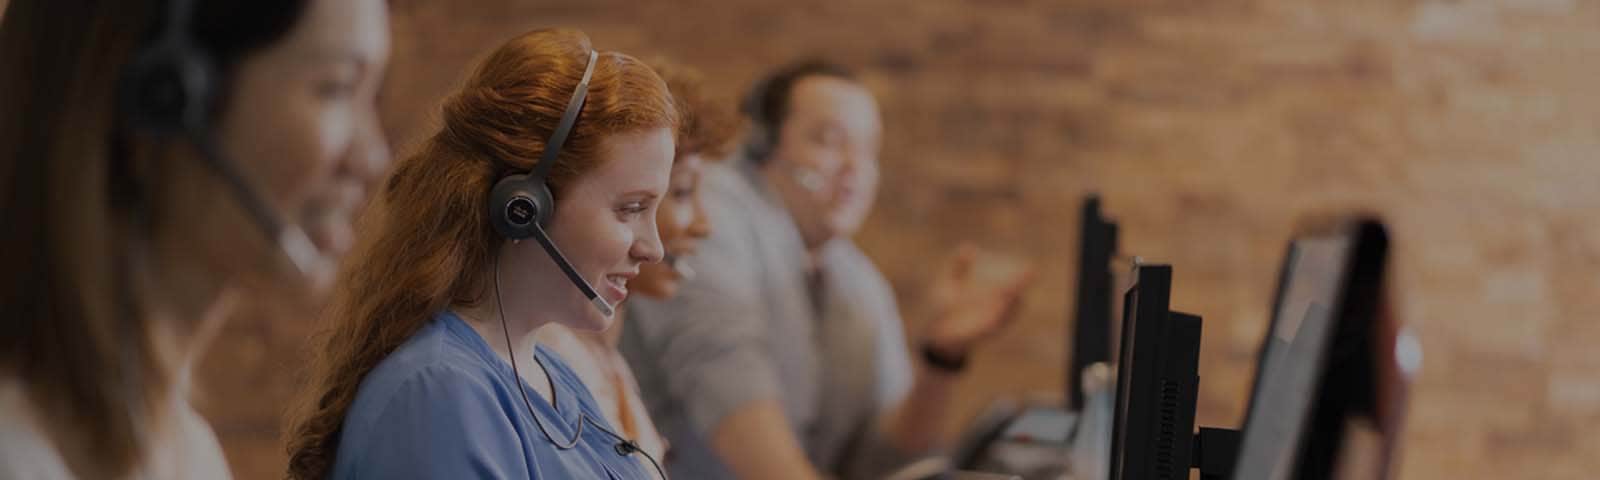 Contact Center AI Solutions